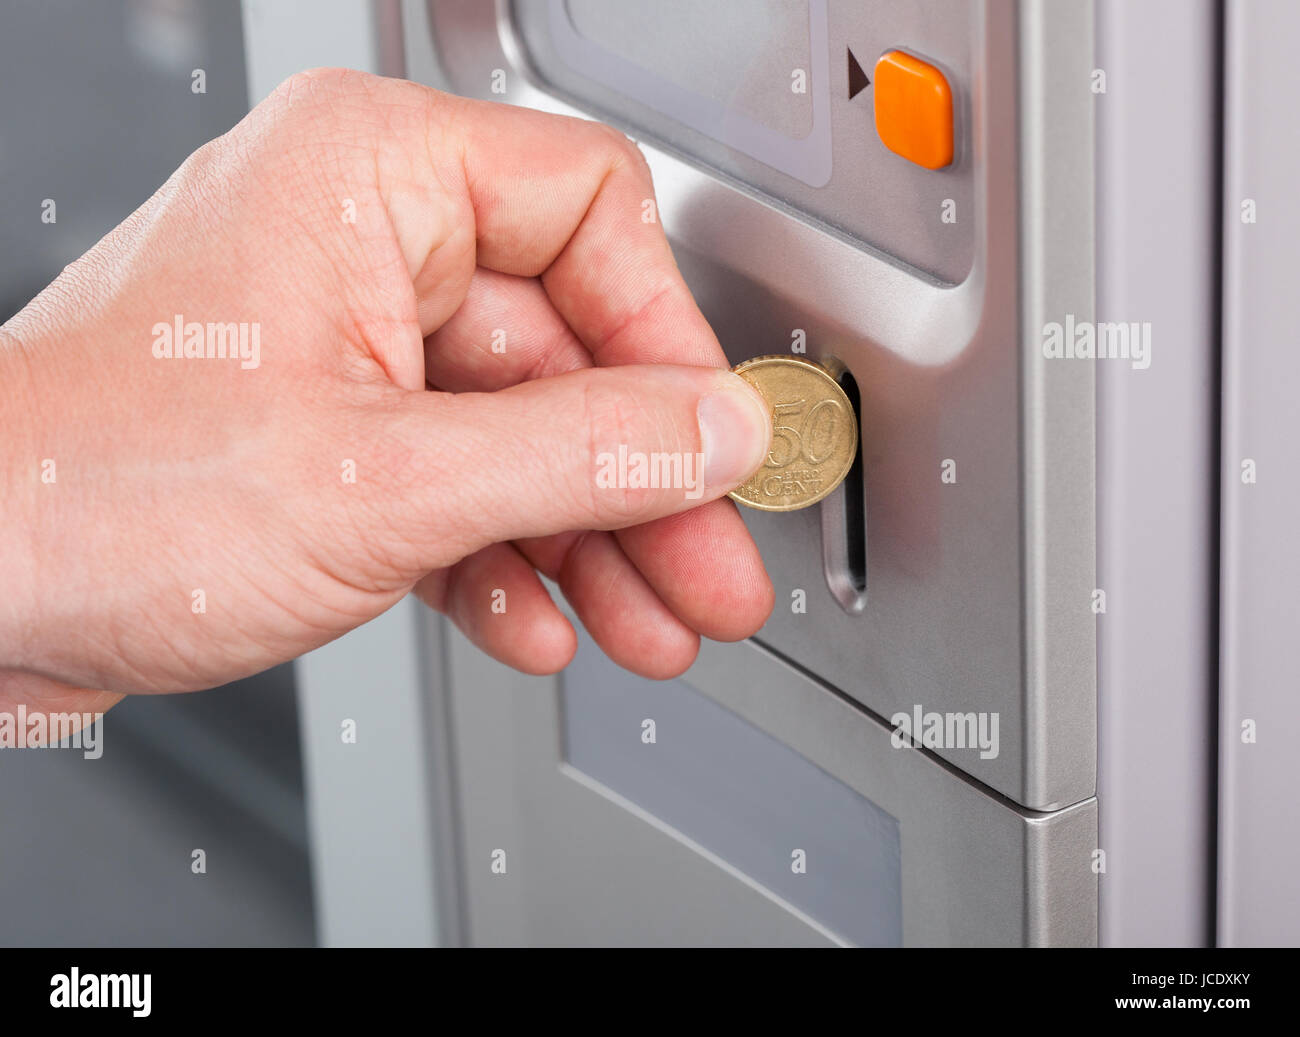 Close-up of human hand inserting coin in vending machine Stock Photo